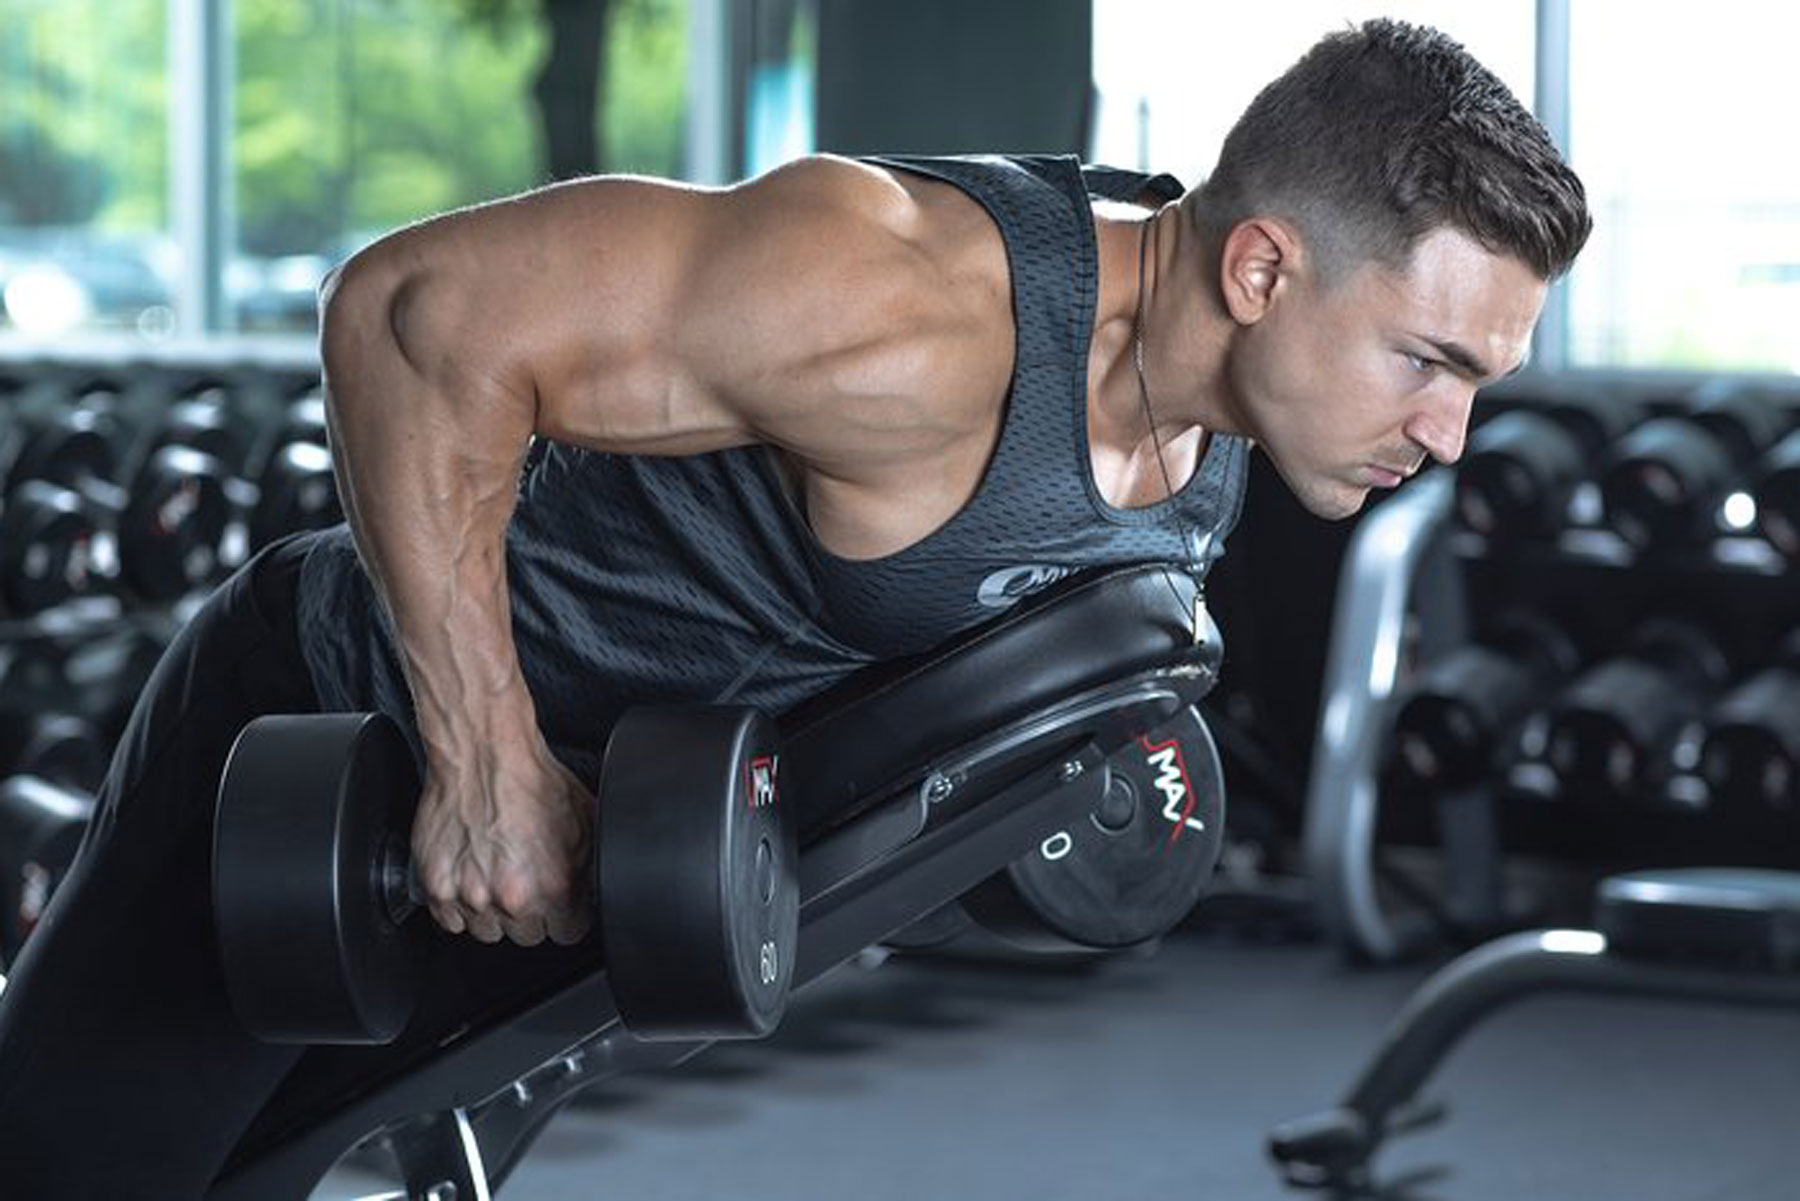 15 Dumbbell Back Exercises to Help You Build Strength and Improve Posture